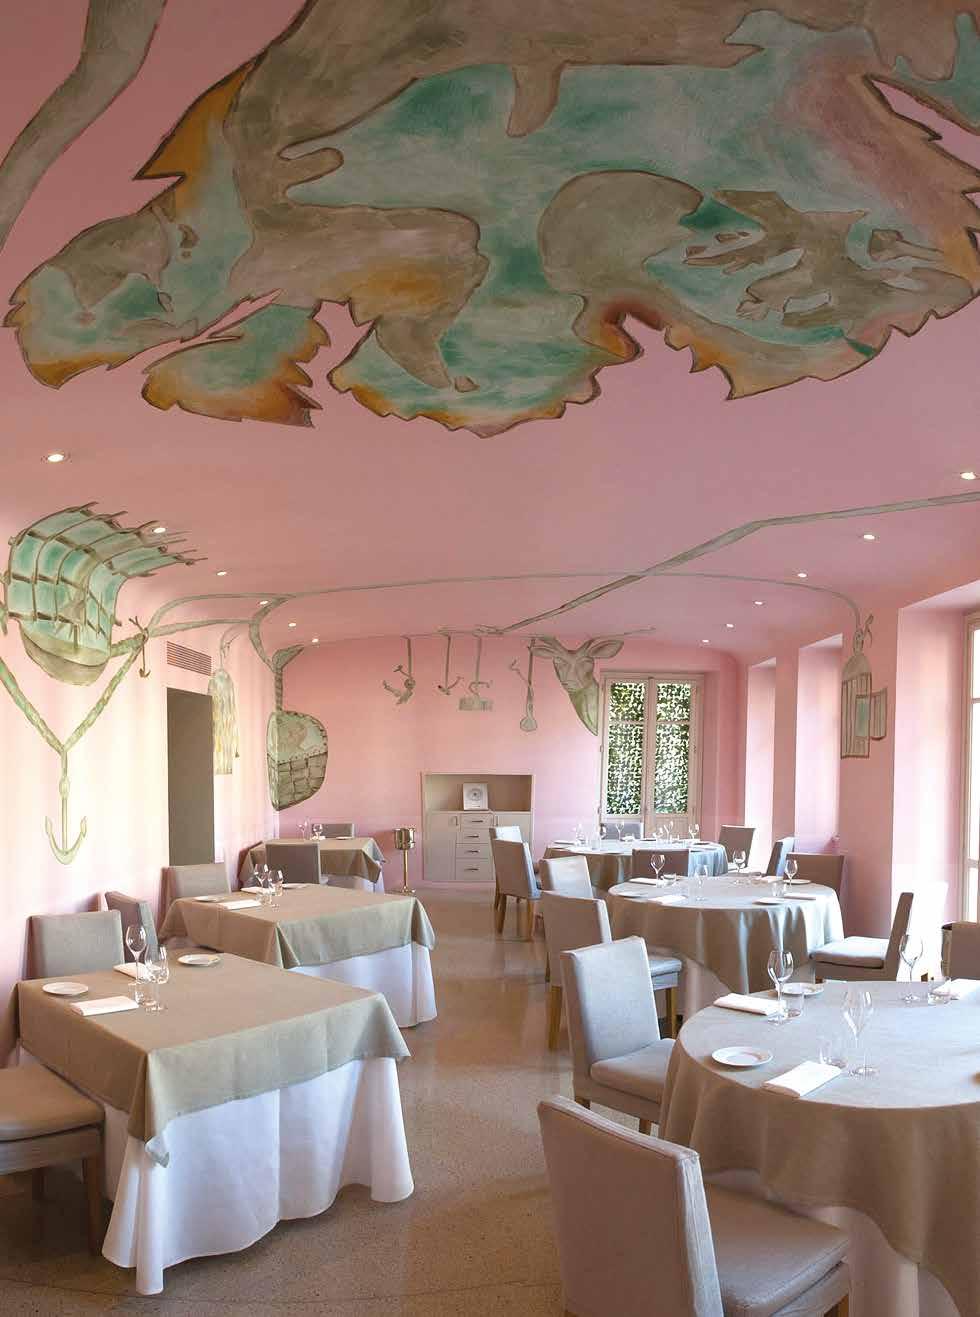 ART The Fresco FRANCESCO CLEMENTE Restaurant Piazza Duomo, Alba, 2007 Piazza Duomo is known for the culinary expertise of Crippa, but to the culinary art of the chef, you add an additional